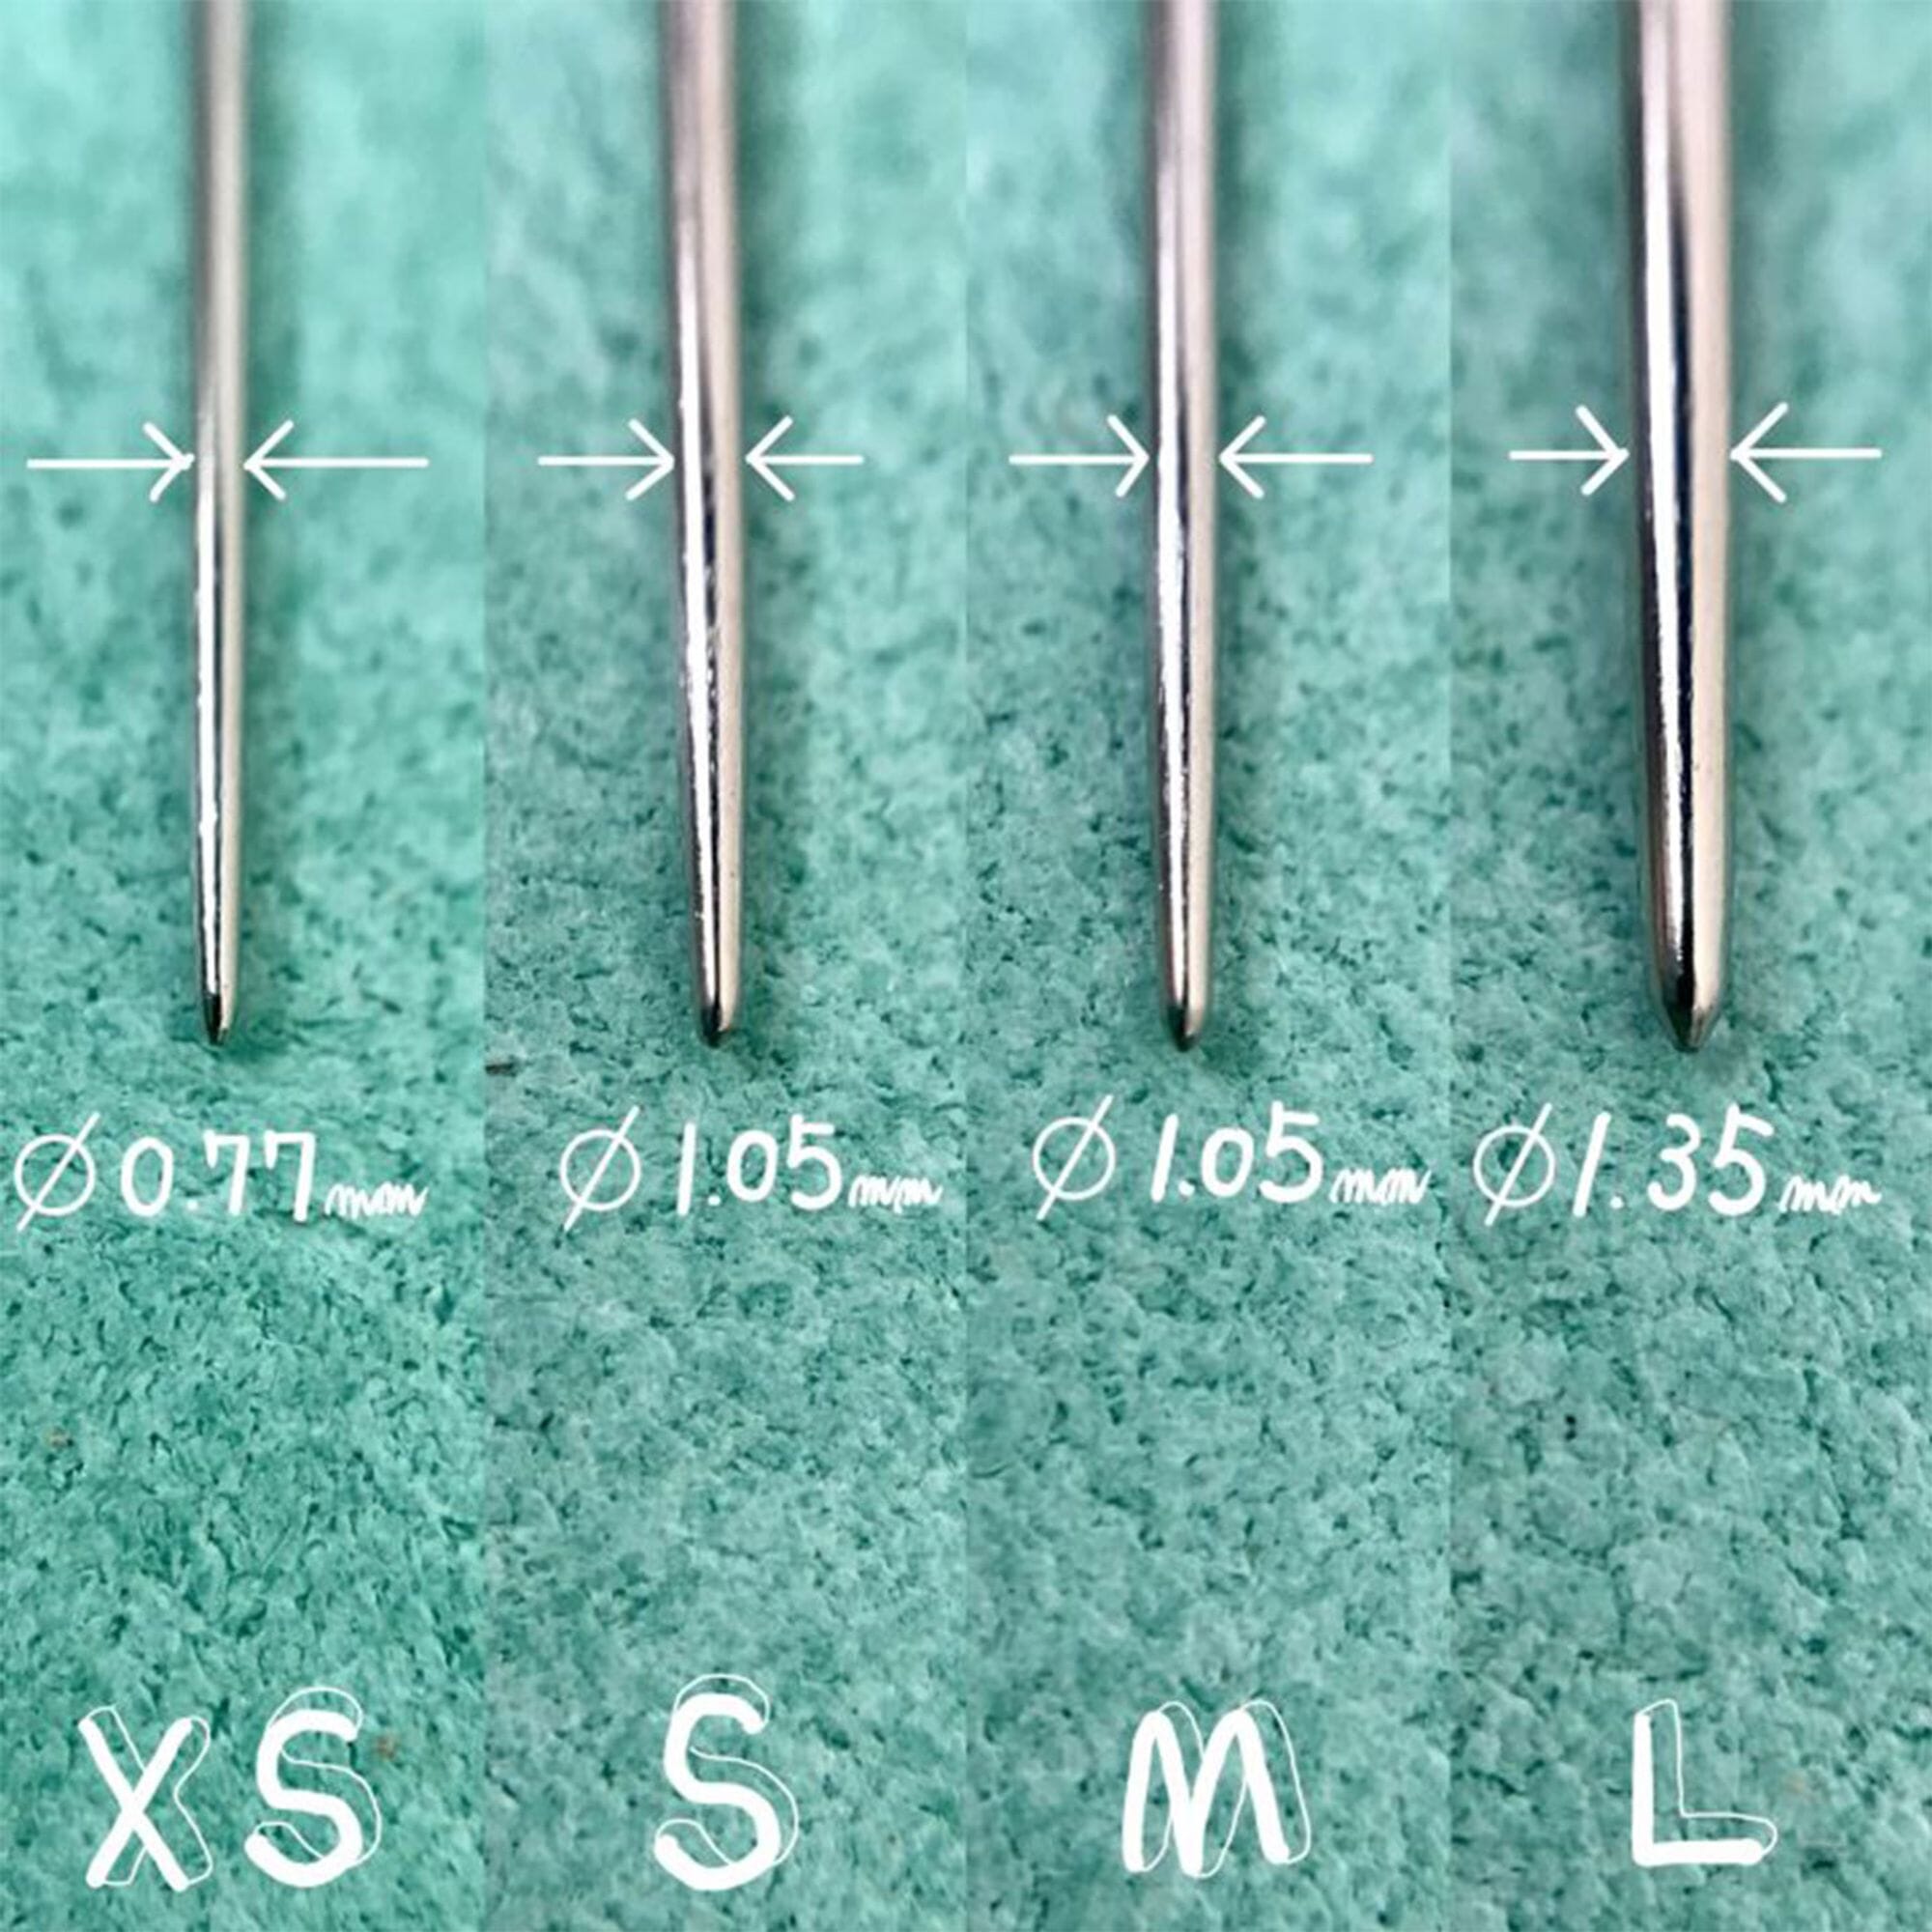 4 Straight Hand Sewing Needle - Bond Products Inc